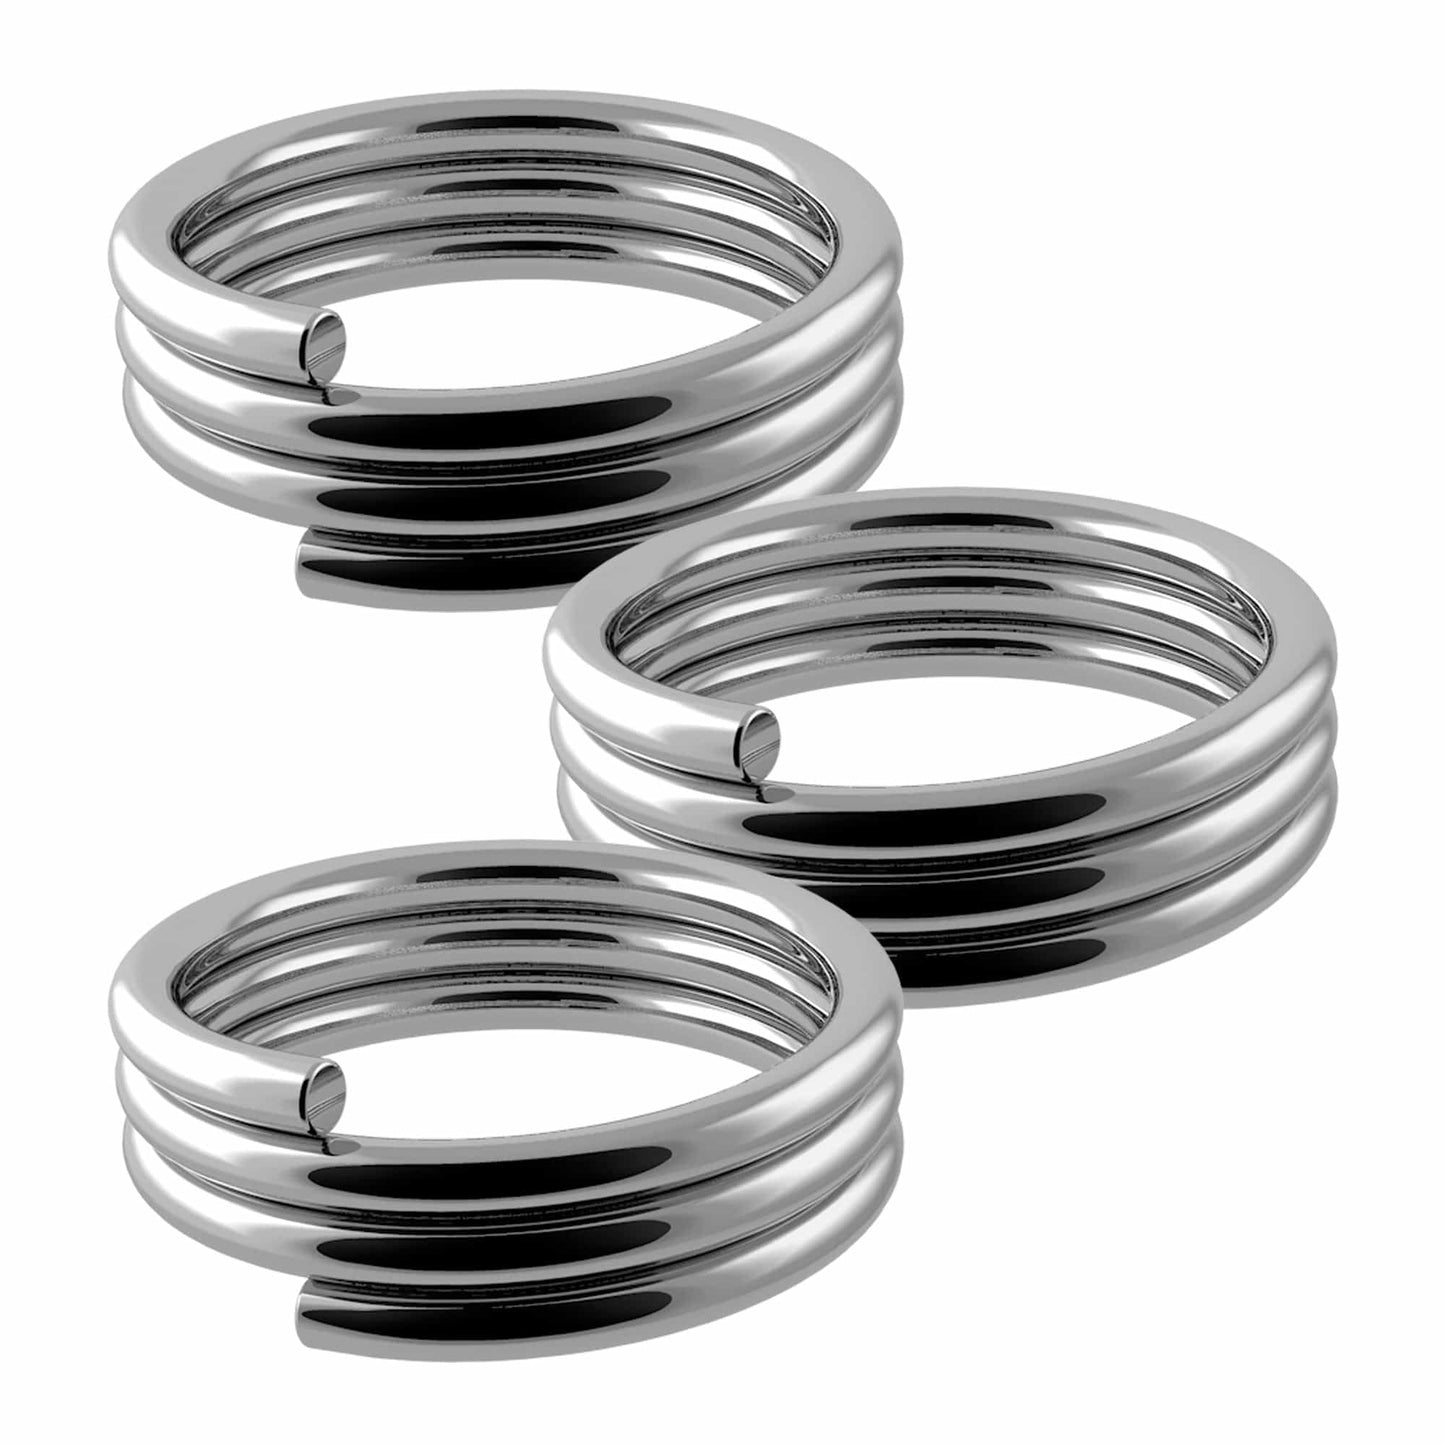 Designa Springs - for use with Nylon Shafts - 20 Sets (60) Silver